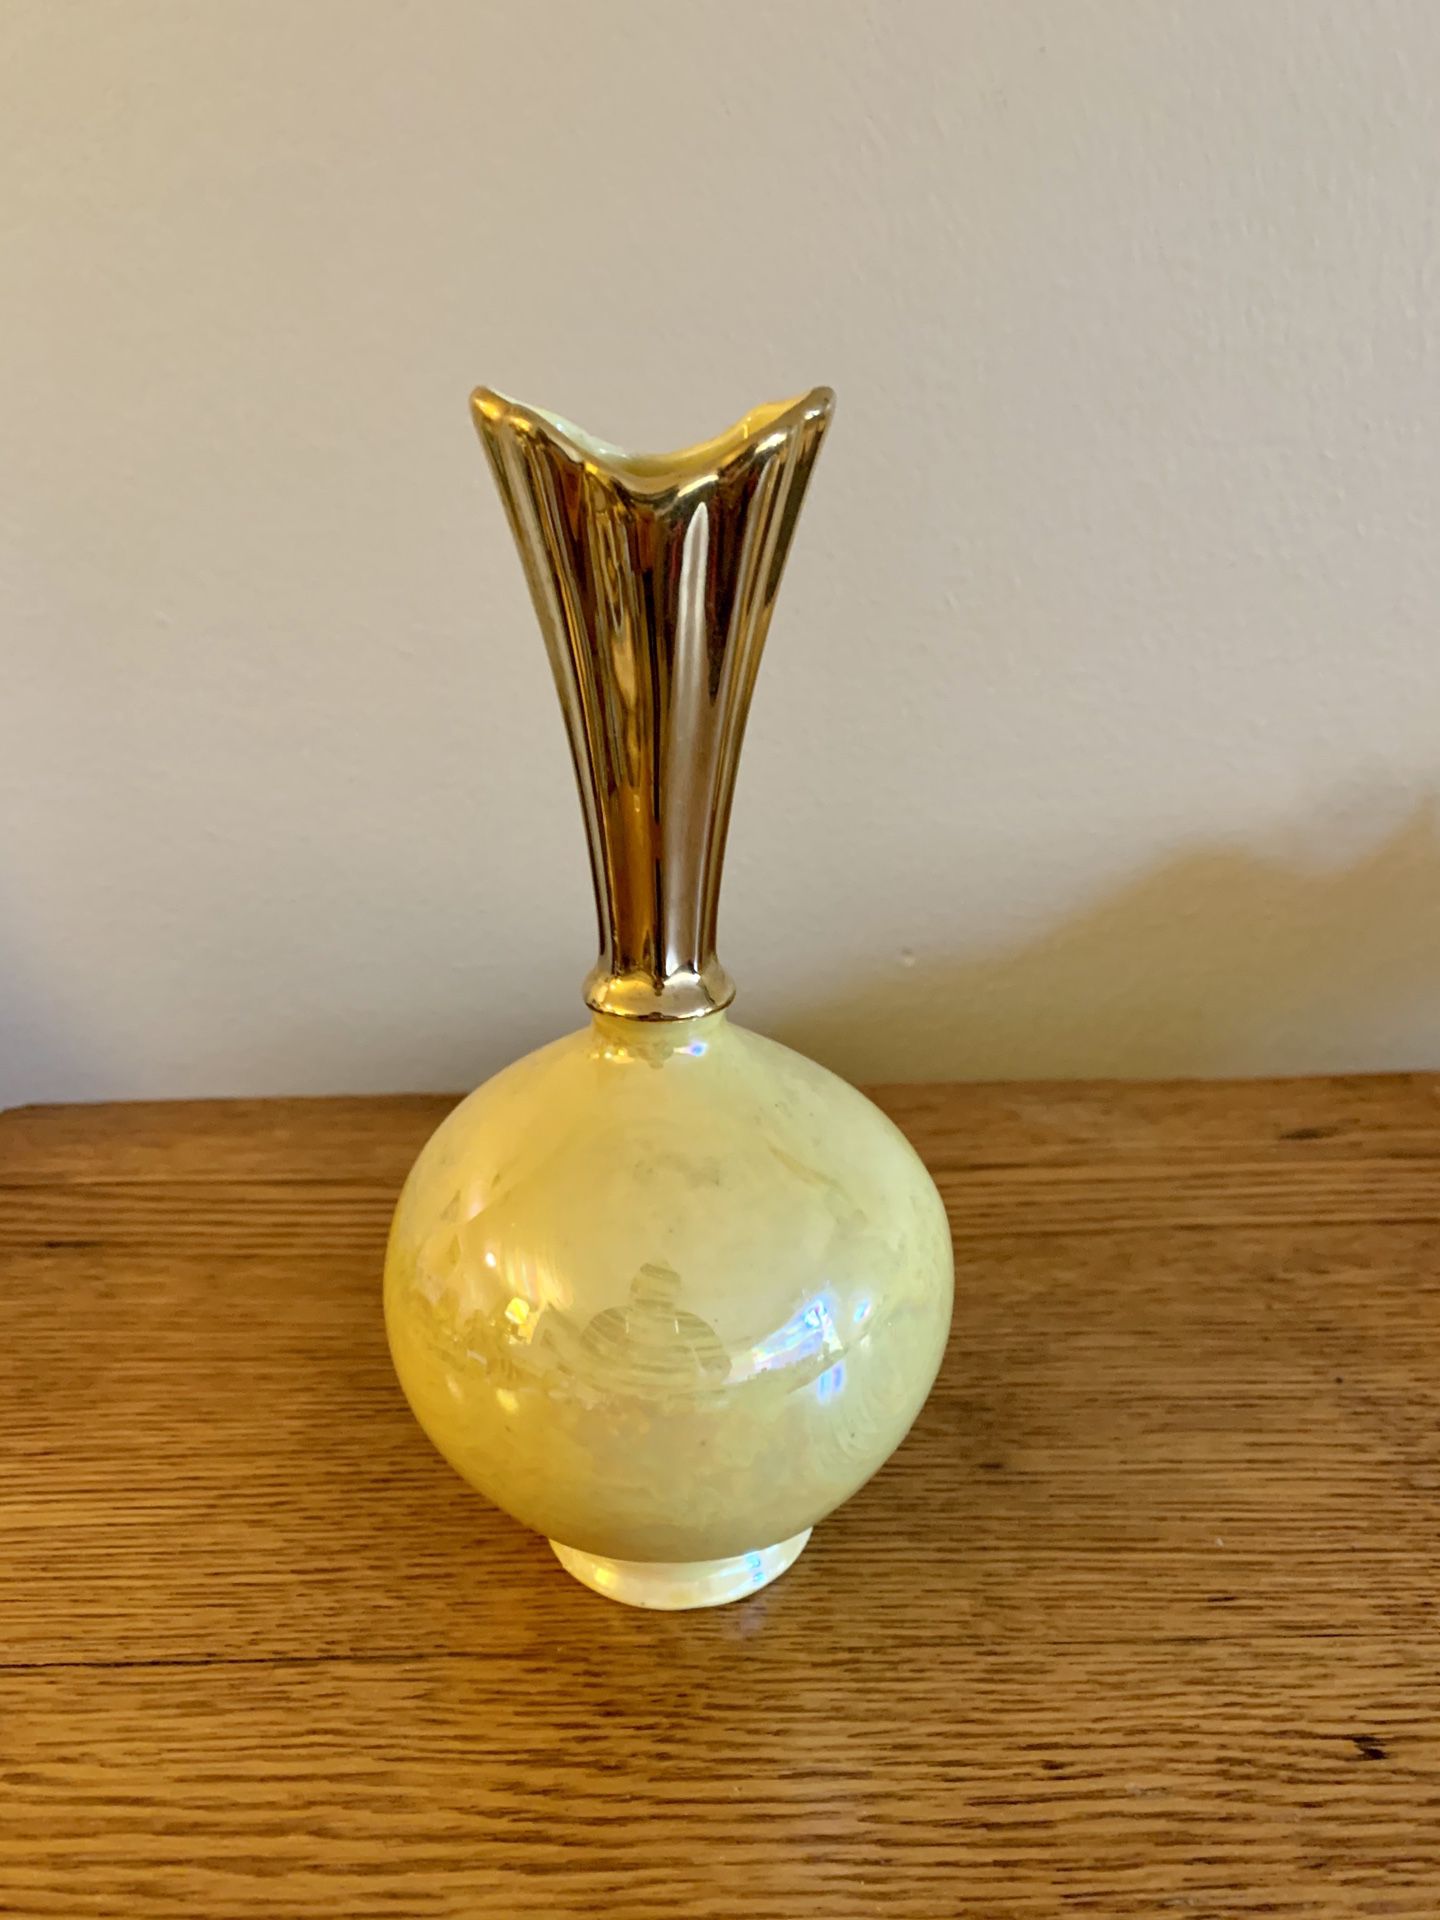 USA made vase with gold